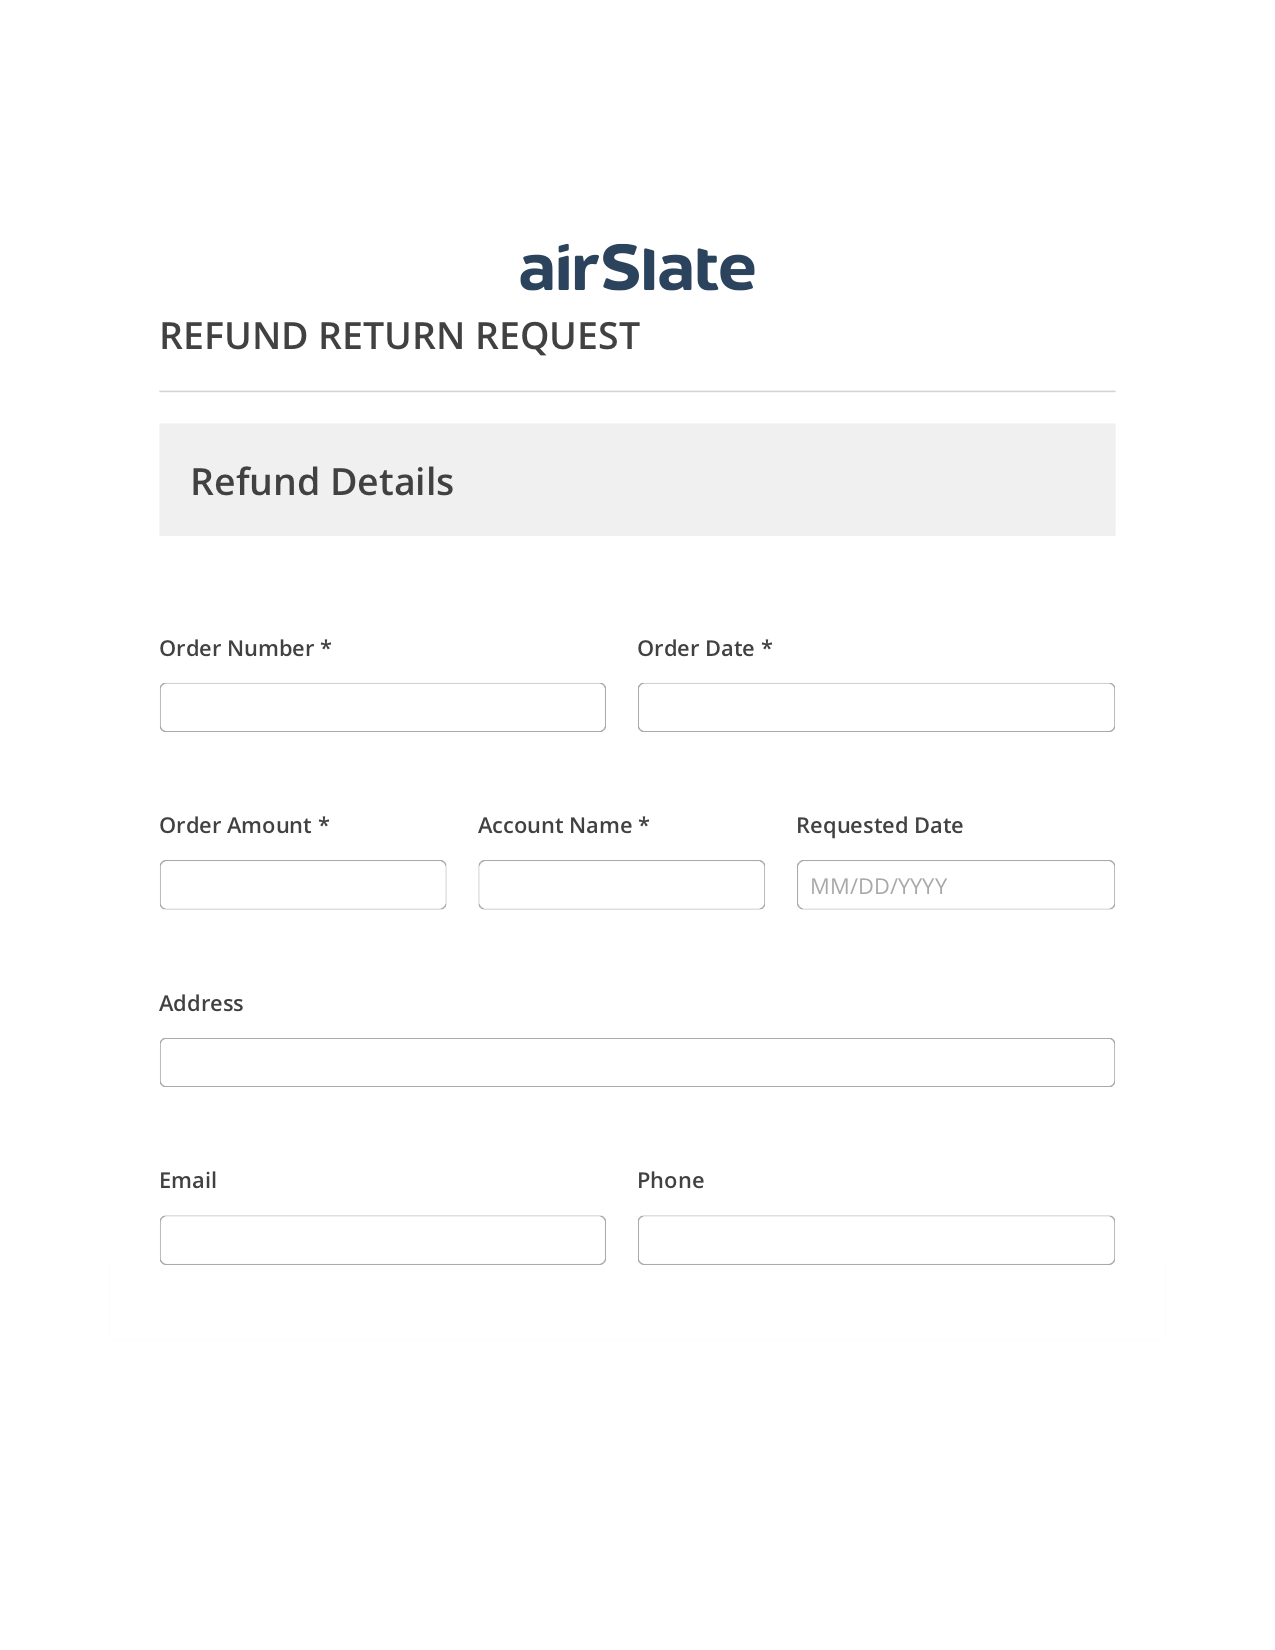 Refund/Return Request Flow Add Tags to Slate Bot